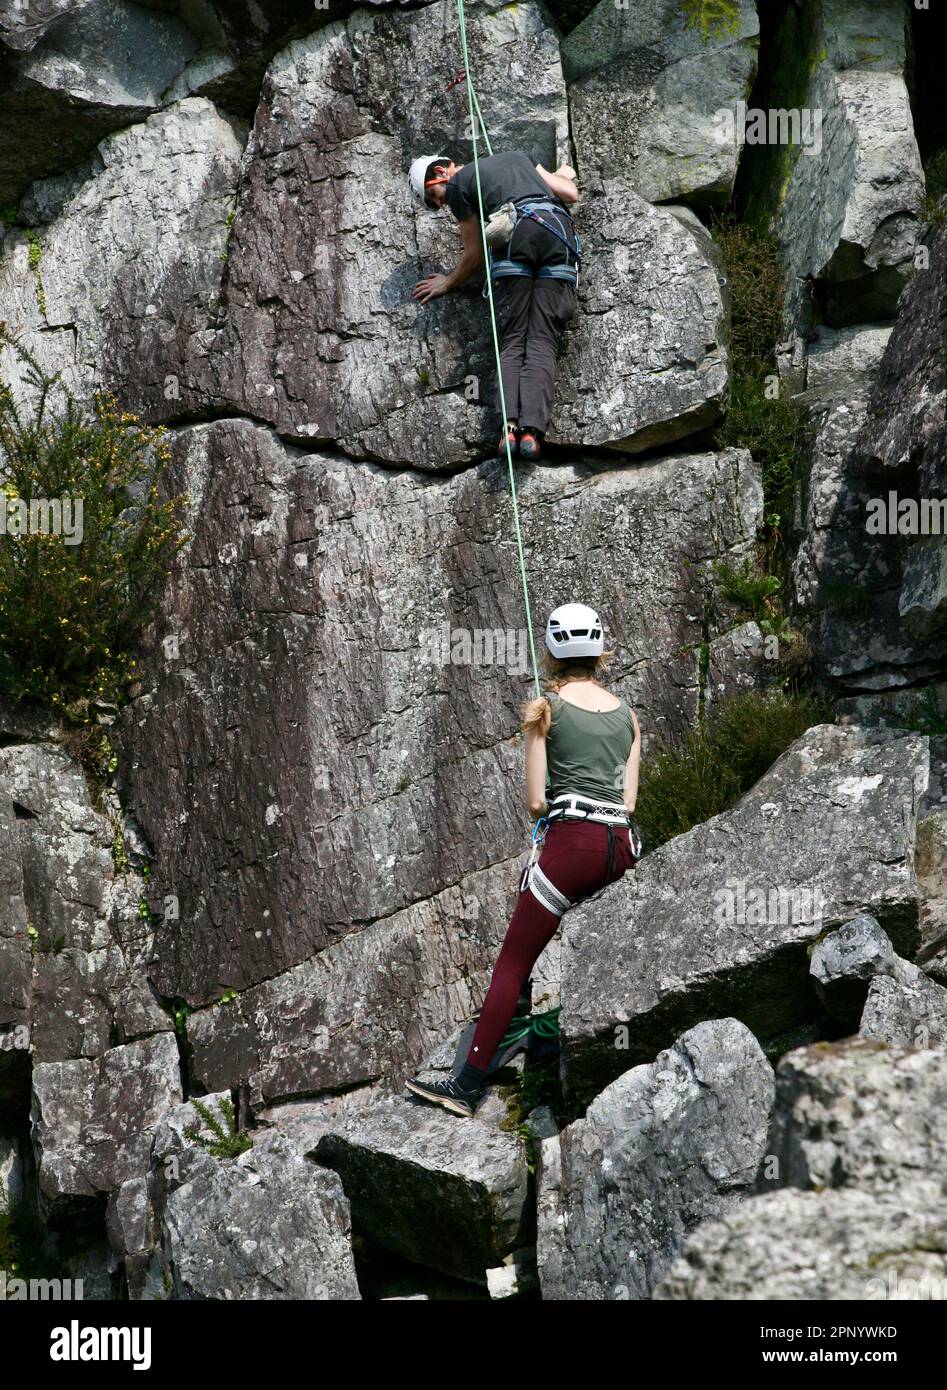 The rock climbers at Fosse Arthour, Normandy, France, Europe Stock Photo